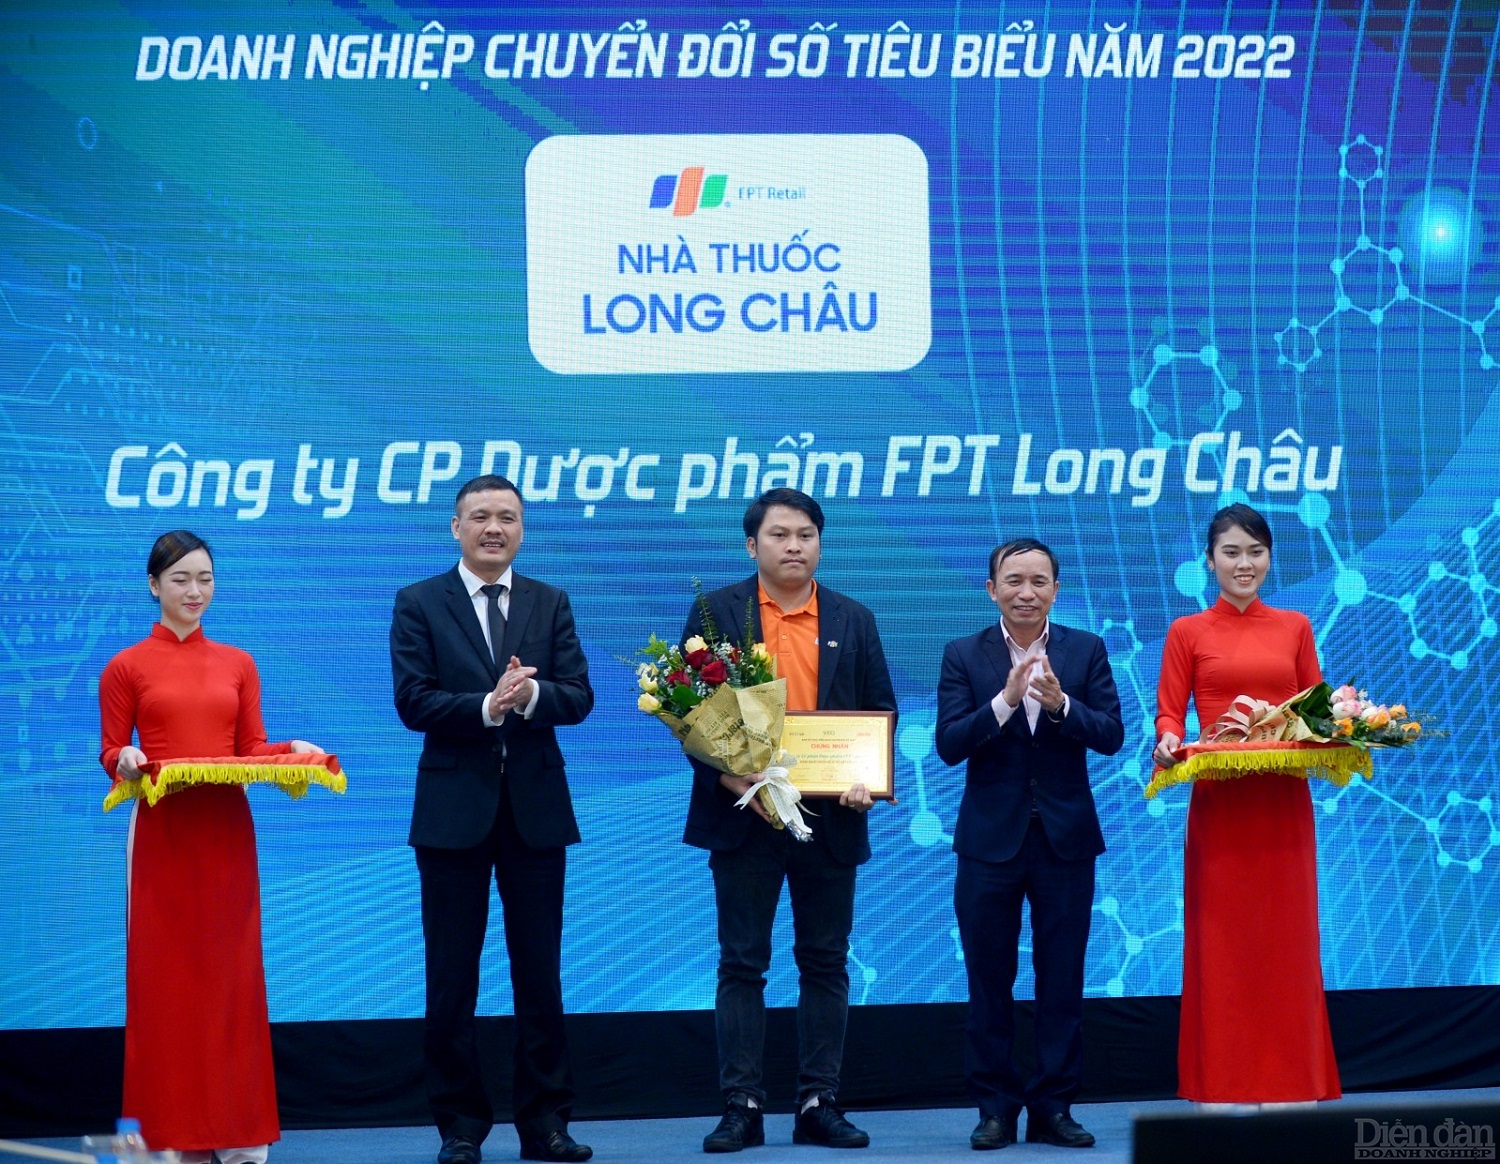 The representative of FPT Long Chau (in the middle of the picture) received the award